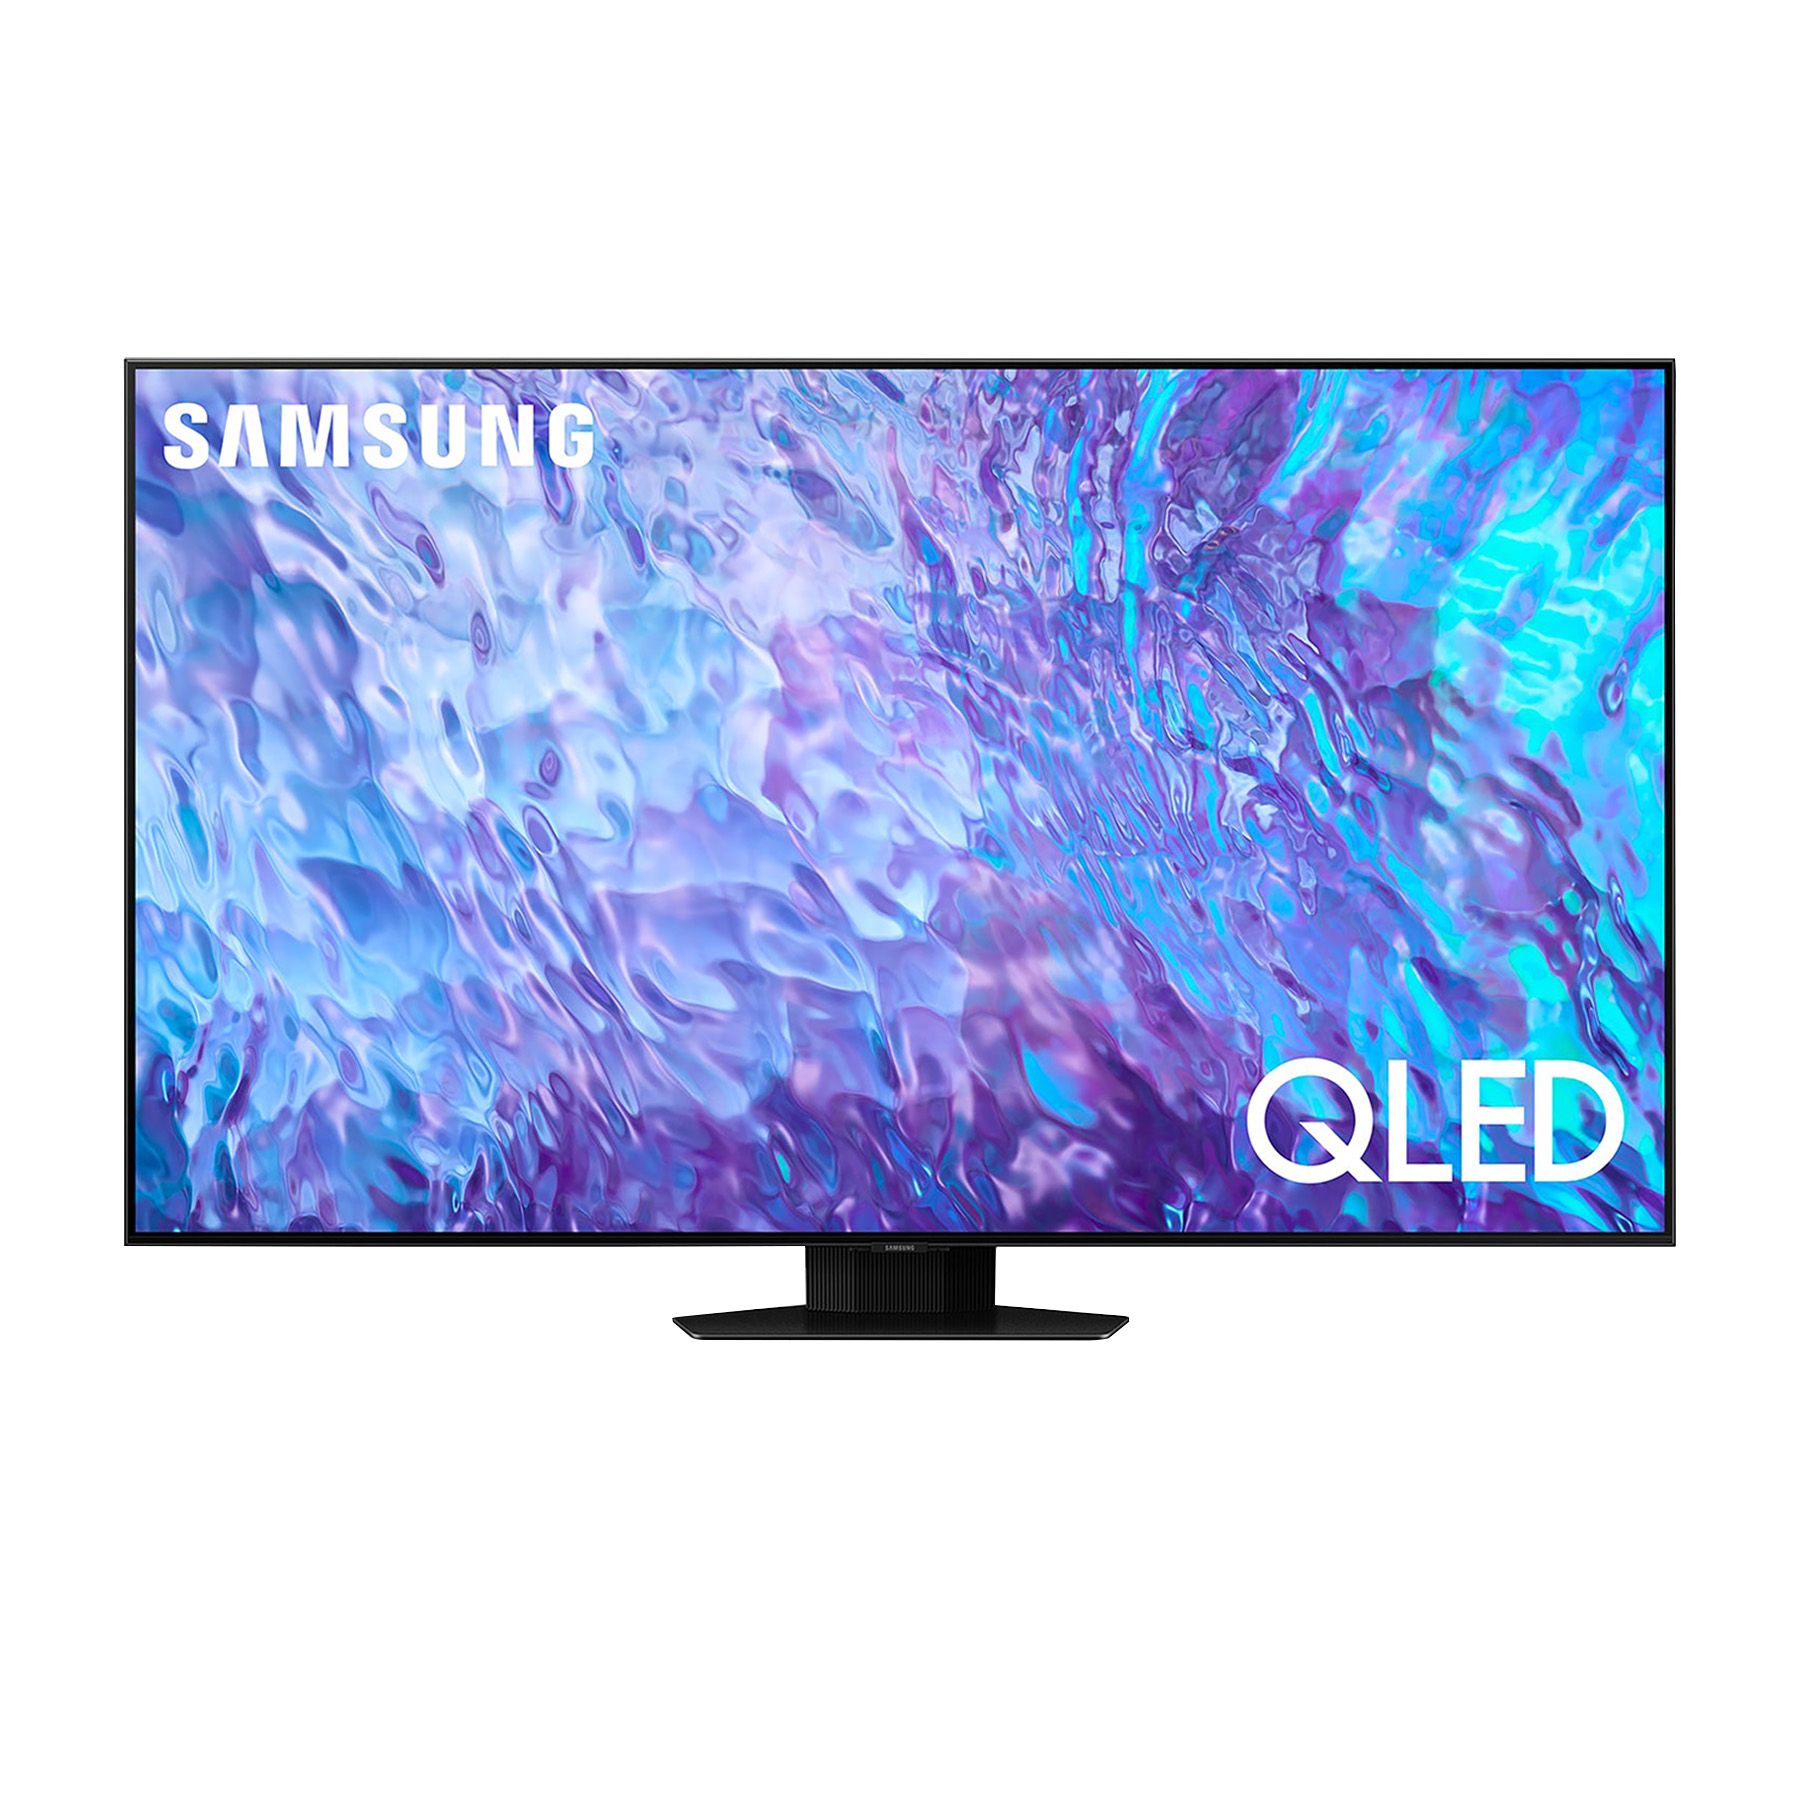 75" QLED 4K Smart TV with Your Choice Subscription and 5-Year Coverage - BJs Wholesale Club